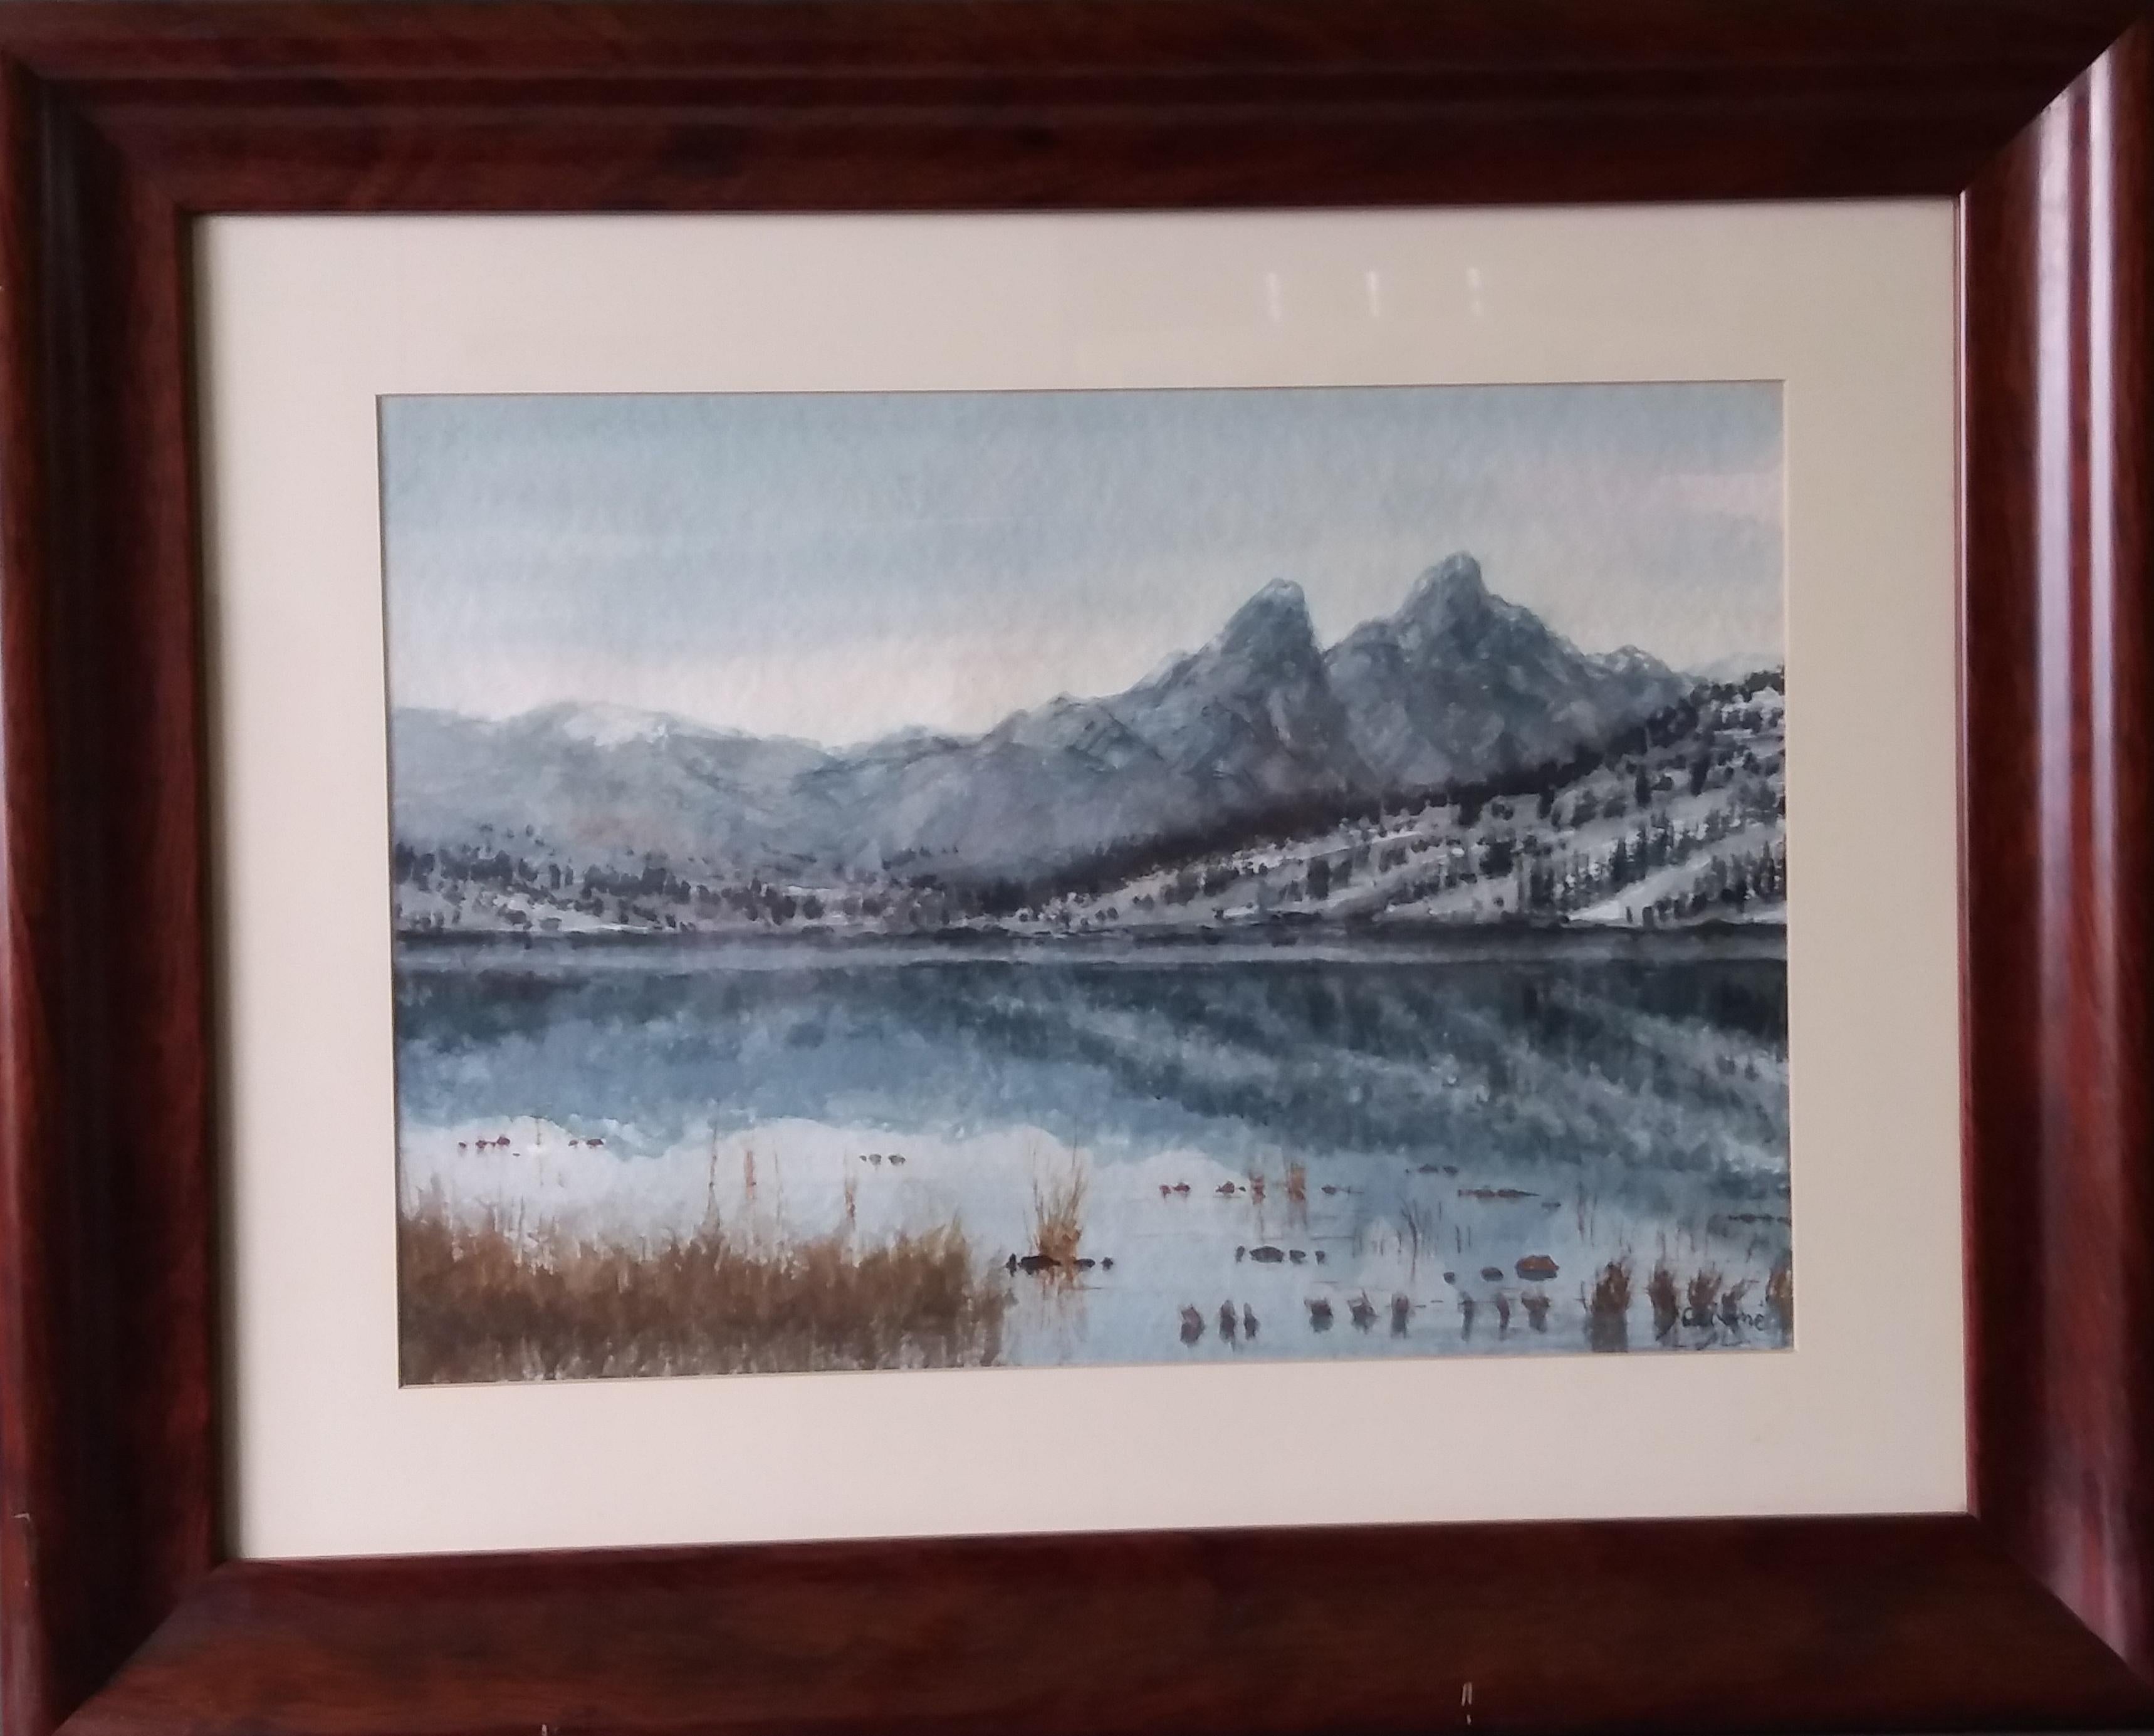  Cabane 13  Lake in the Pyrenees Landscape . figurative. lake.mountains. blue - Realist Painting by Joaquin Cabane